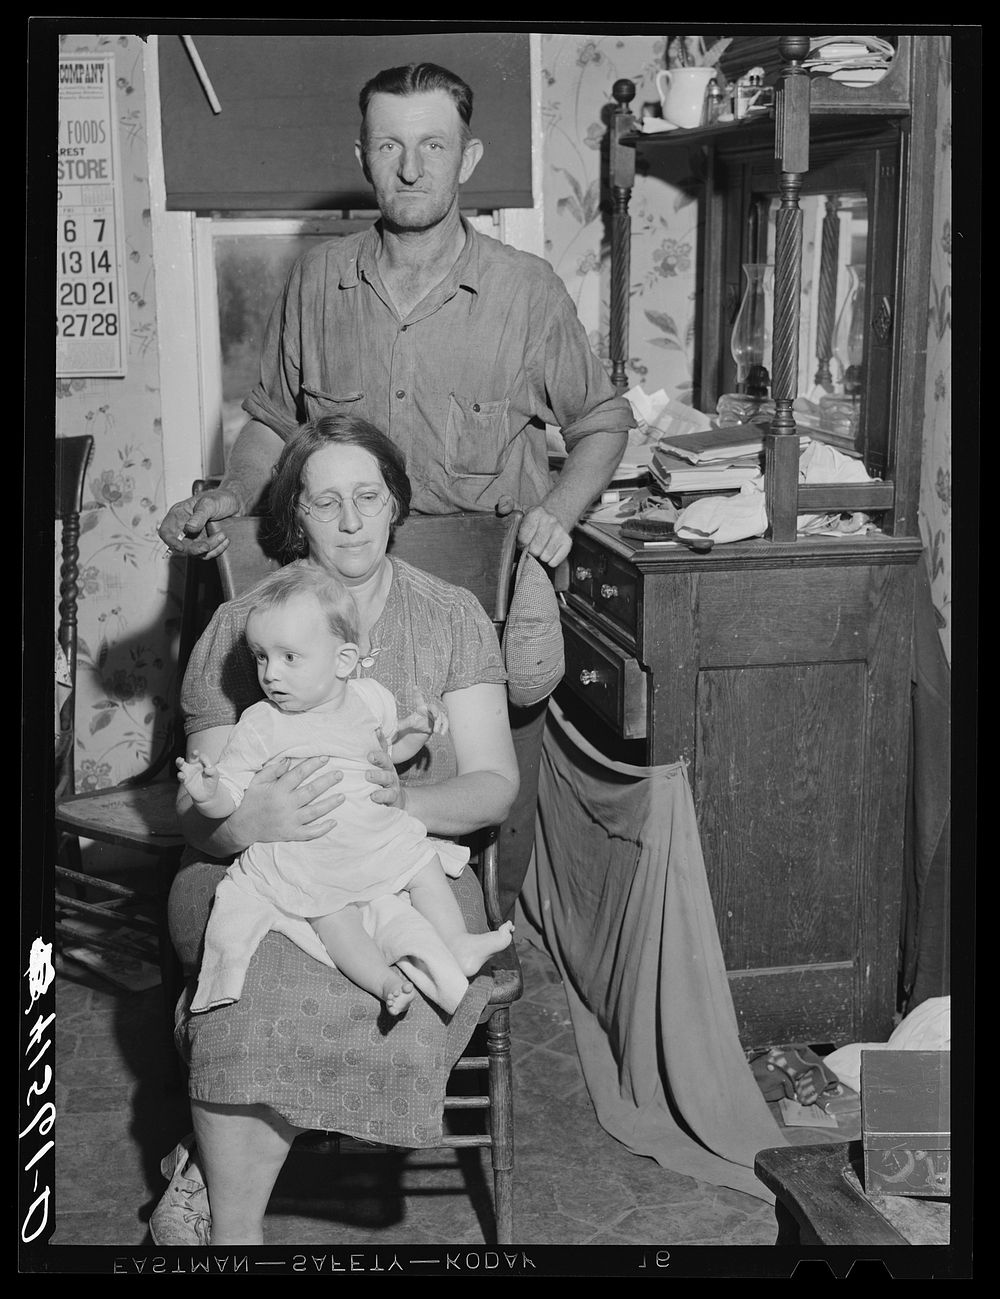 Mr. and Mrs. Colson and one of their children. Tobacco farmers, Suffield, Connecticut. Sourced from the Library of Congress.